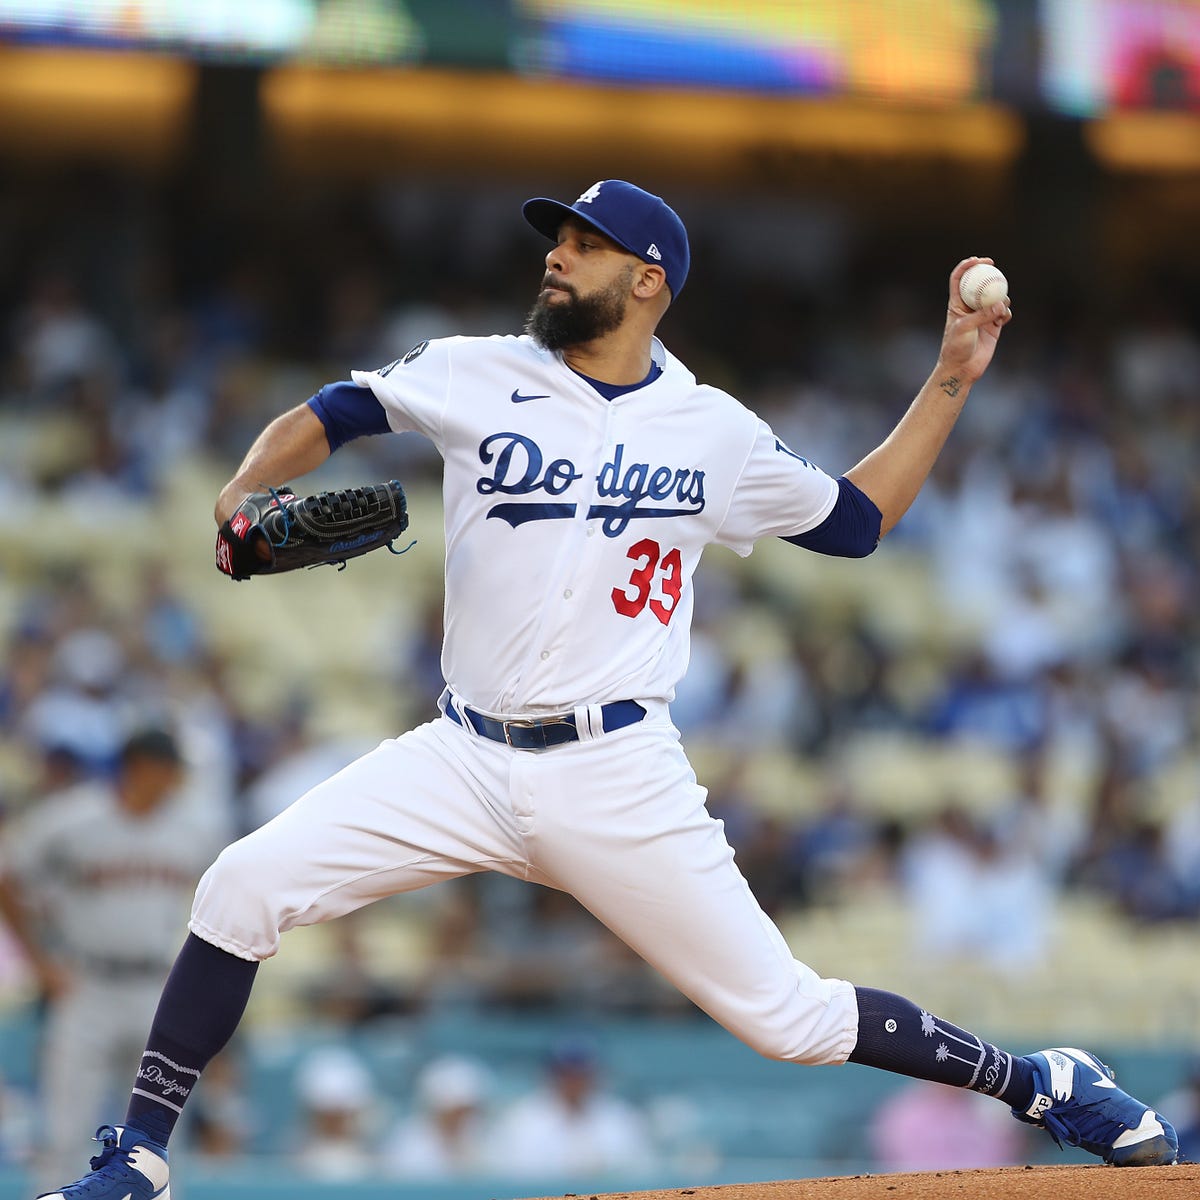 2021 Position Series: Relief pitching, by Cary Osborne